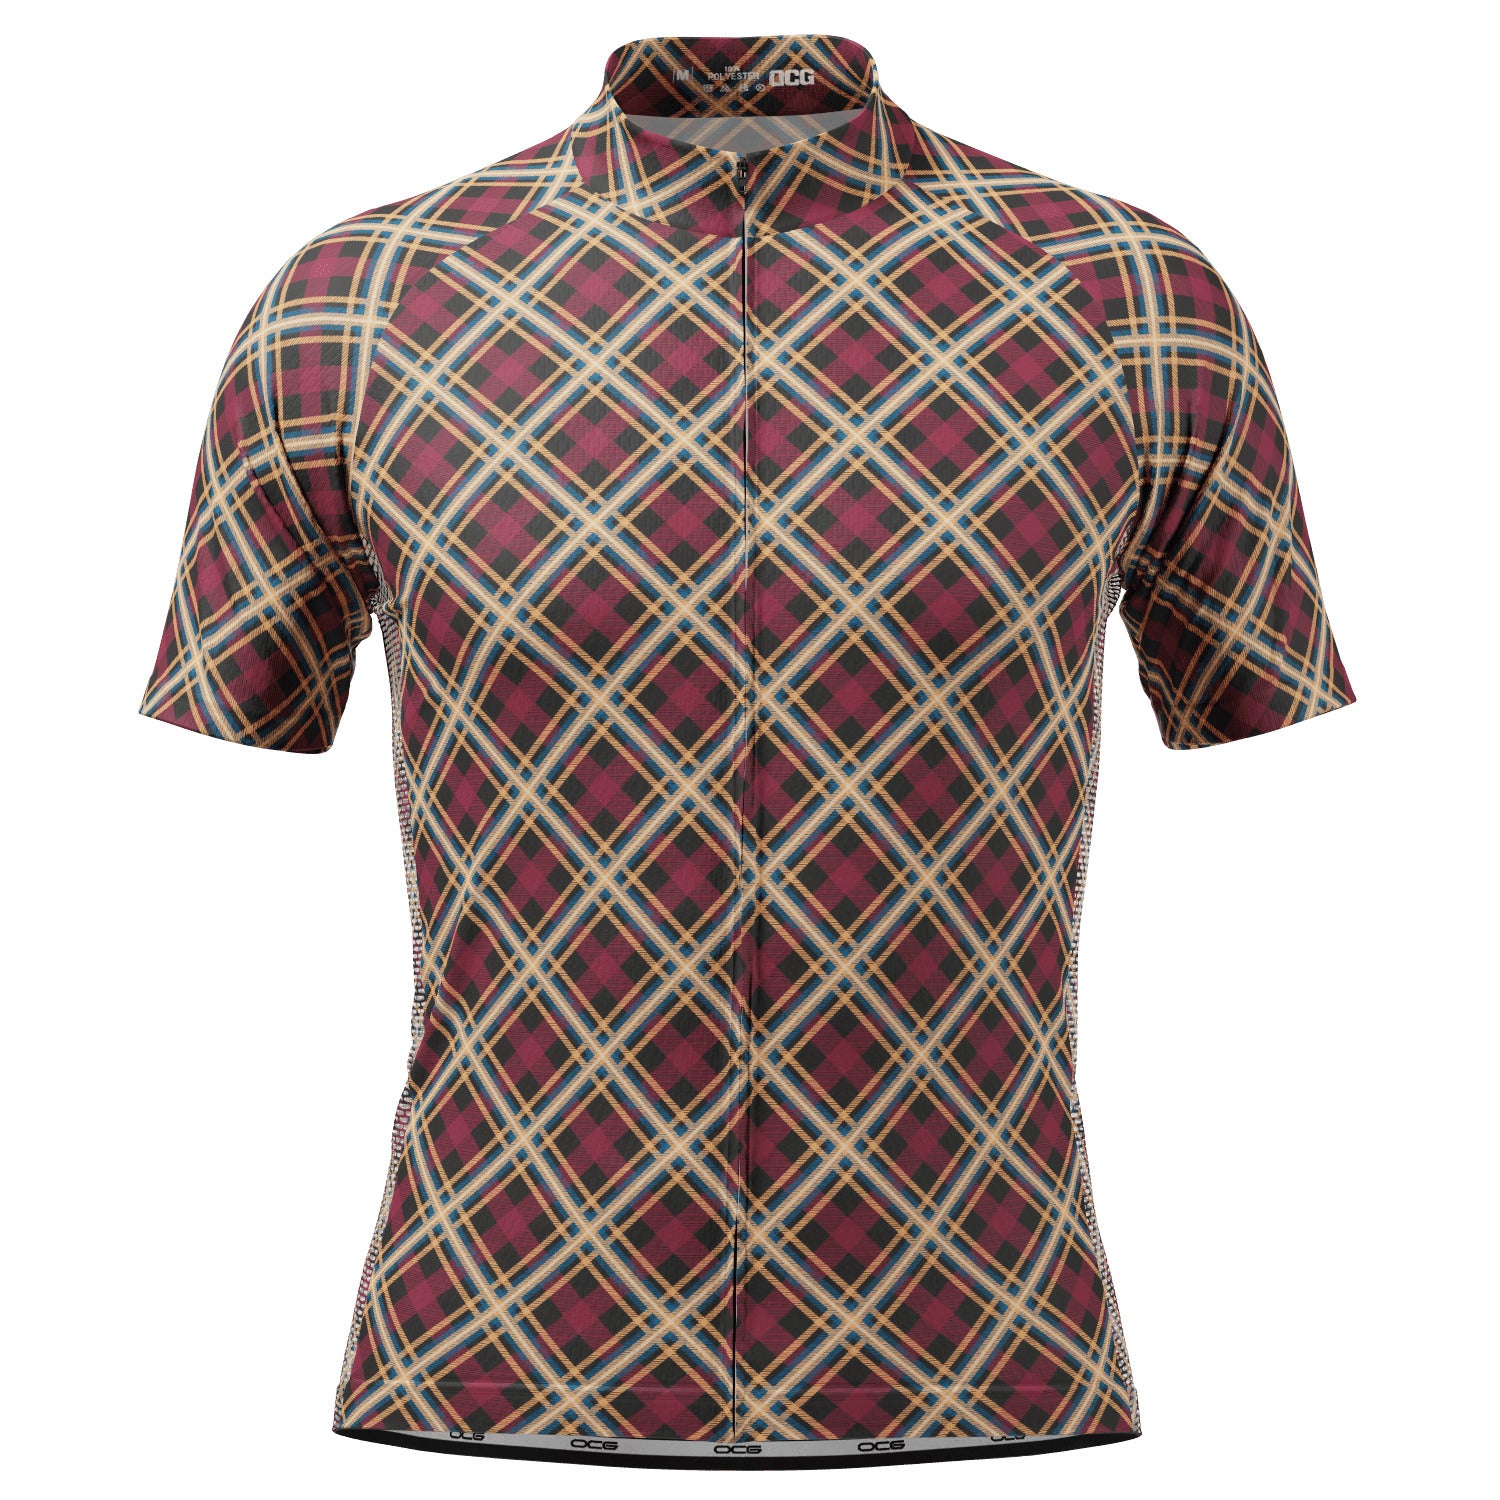 Men's Red Plaid Checkered Short Sleeve Cycling Jersey